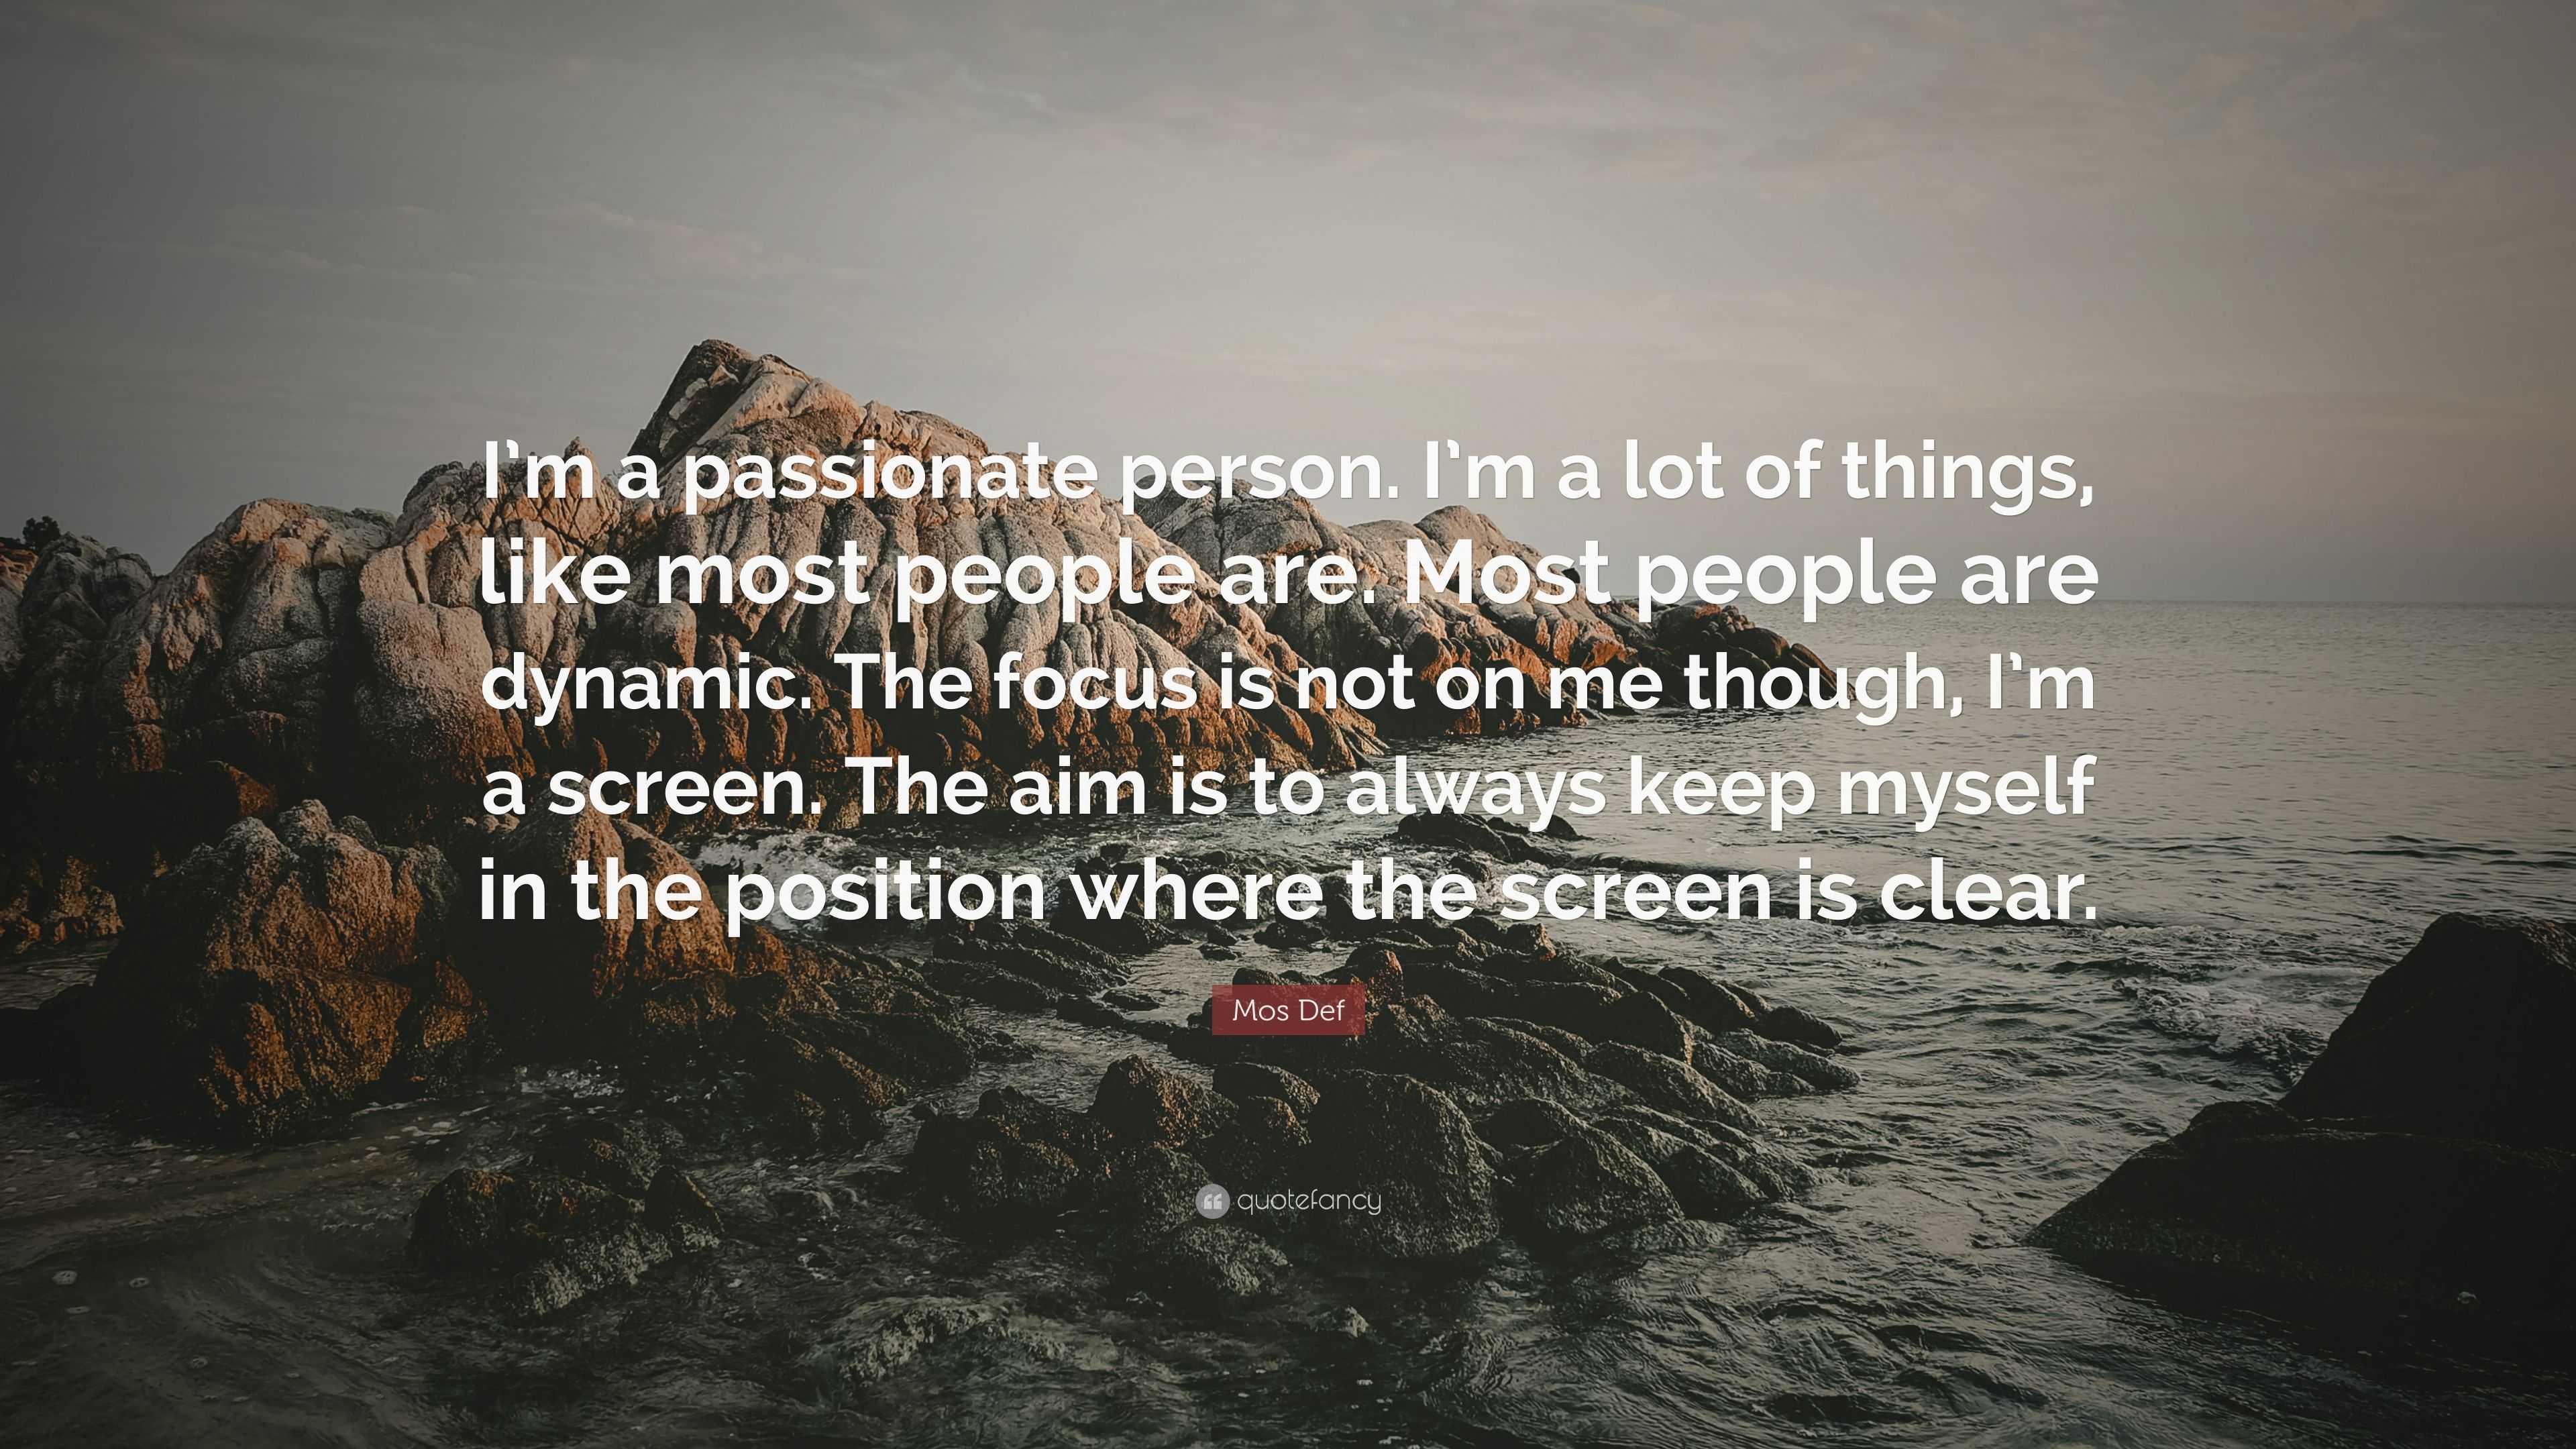 Mos Def Quote: “I’m a passionate person. I’m a lot of things, like most ...